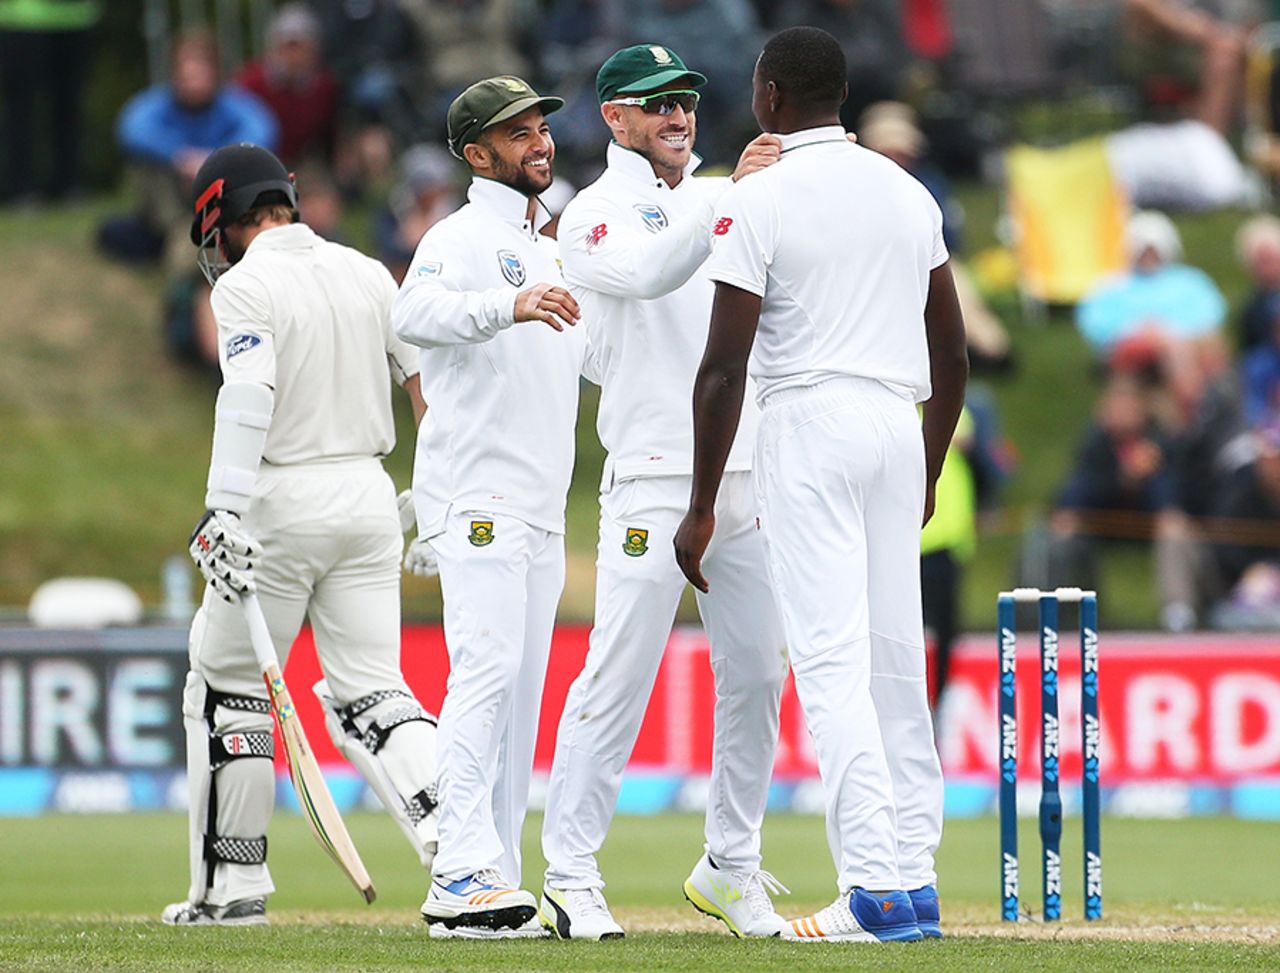 JP Duminy and Faf du Plessis celebrate Kane Williamson's wicket with Kagiso Rabada, New Zealand v South Africa, 1st Test, Dunedin, 3rd day, March 10, 2017